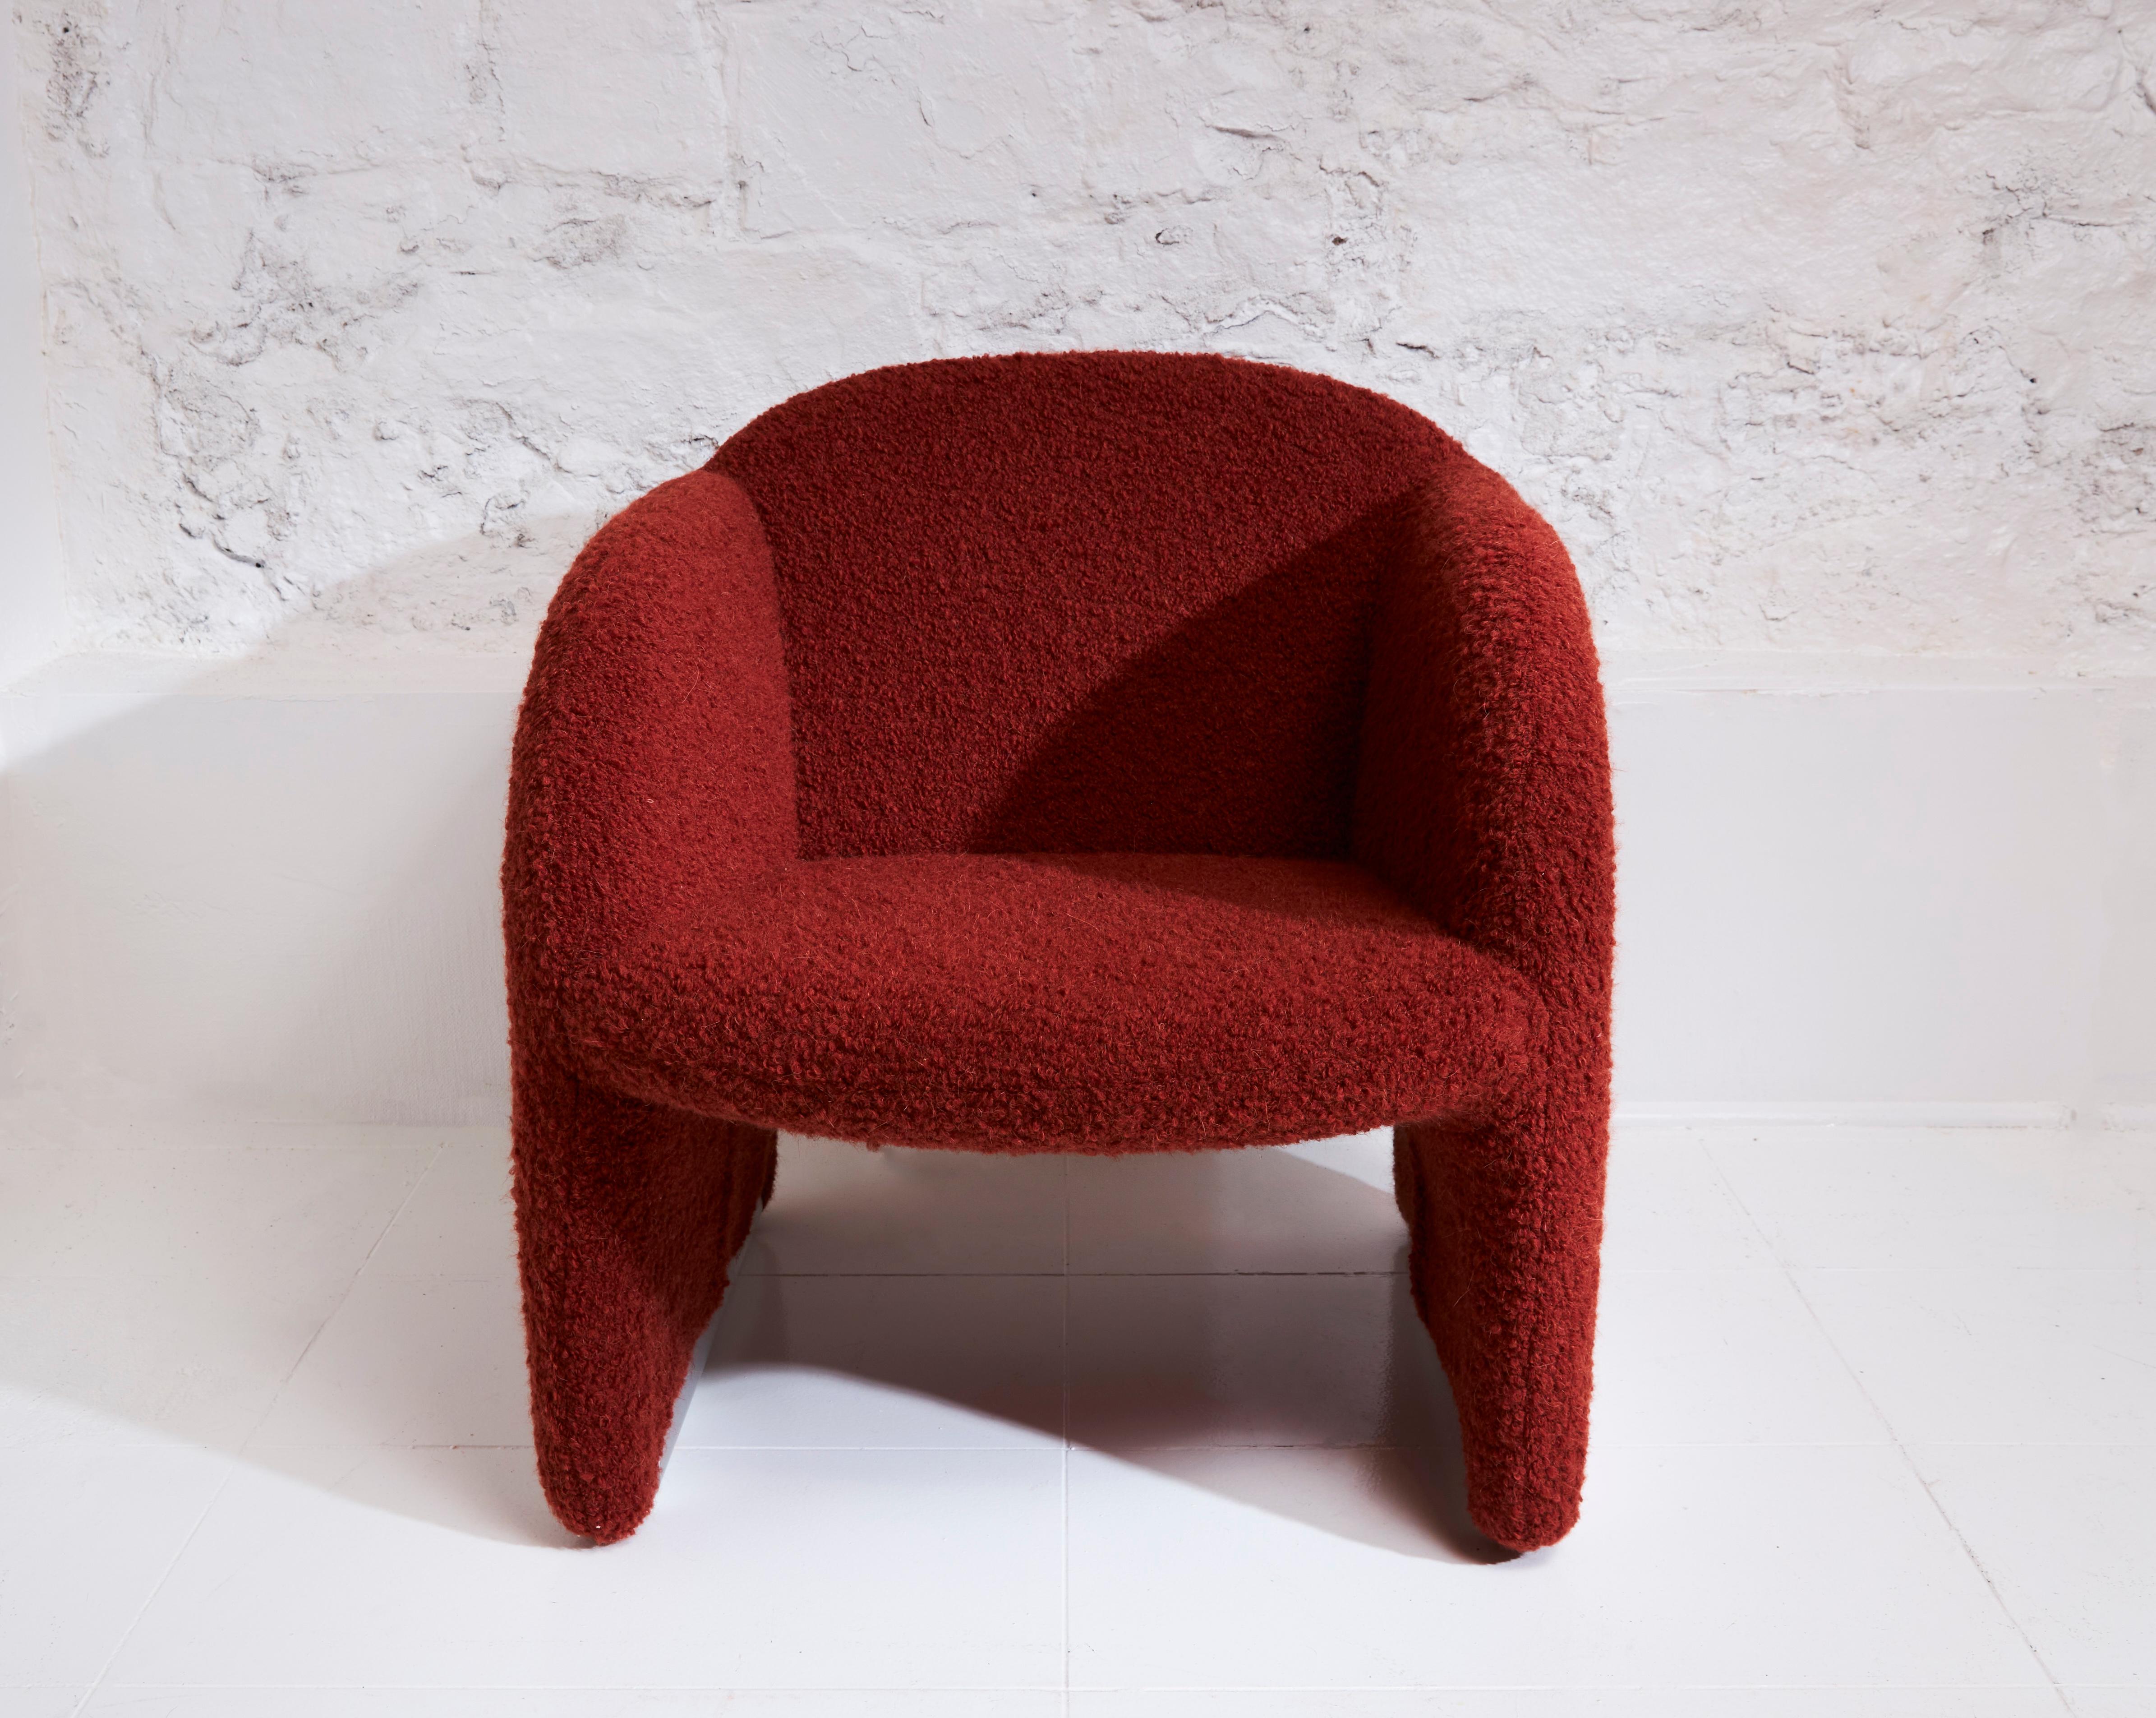 During the 1980s, French designer Pierre Paulin crafted numerous sculptural masterpieces for the Dutch manufacturer Artifort. One of these special pieces, named after his favorite colleague Ben, stands out. Upholstered in a stunning red bouclé wool,